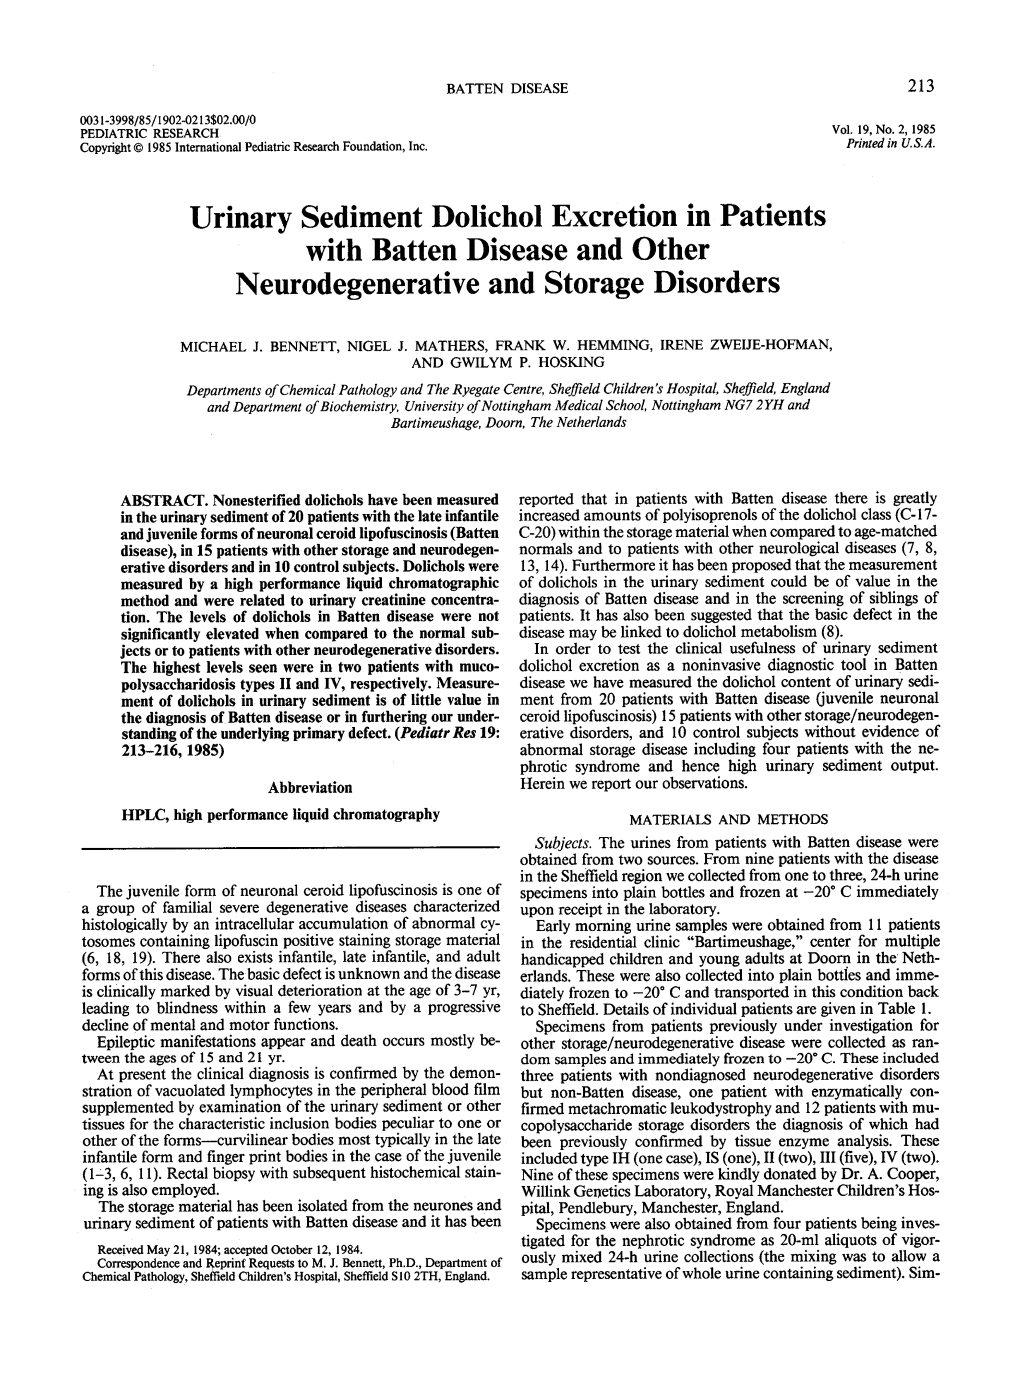 Urinary Sediment Dolichol Excretion in Patients with Batten Disease and Other Neurodegenerative and Storage Disorders